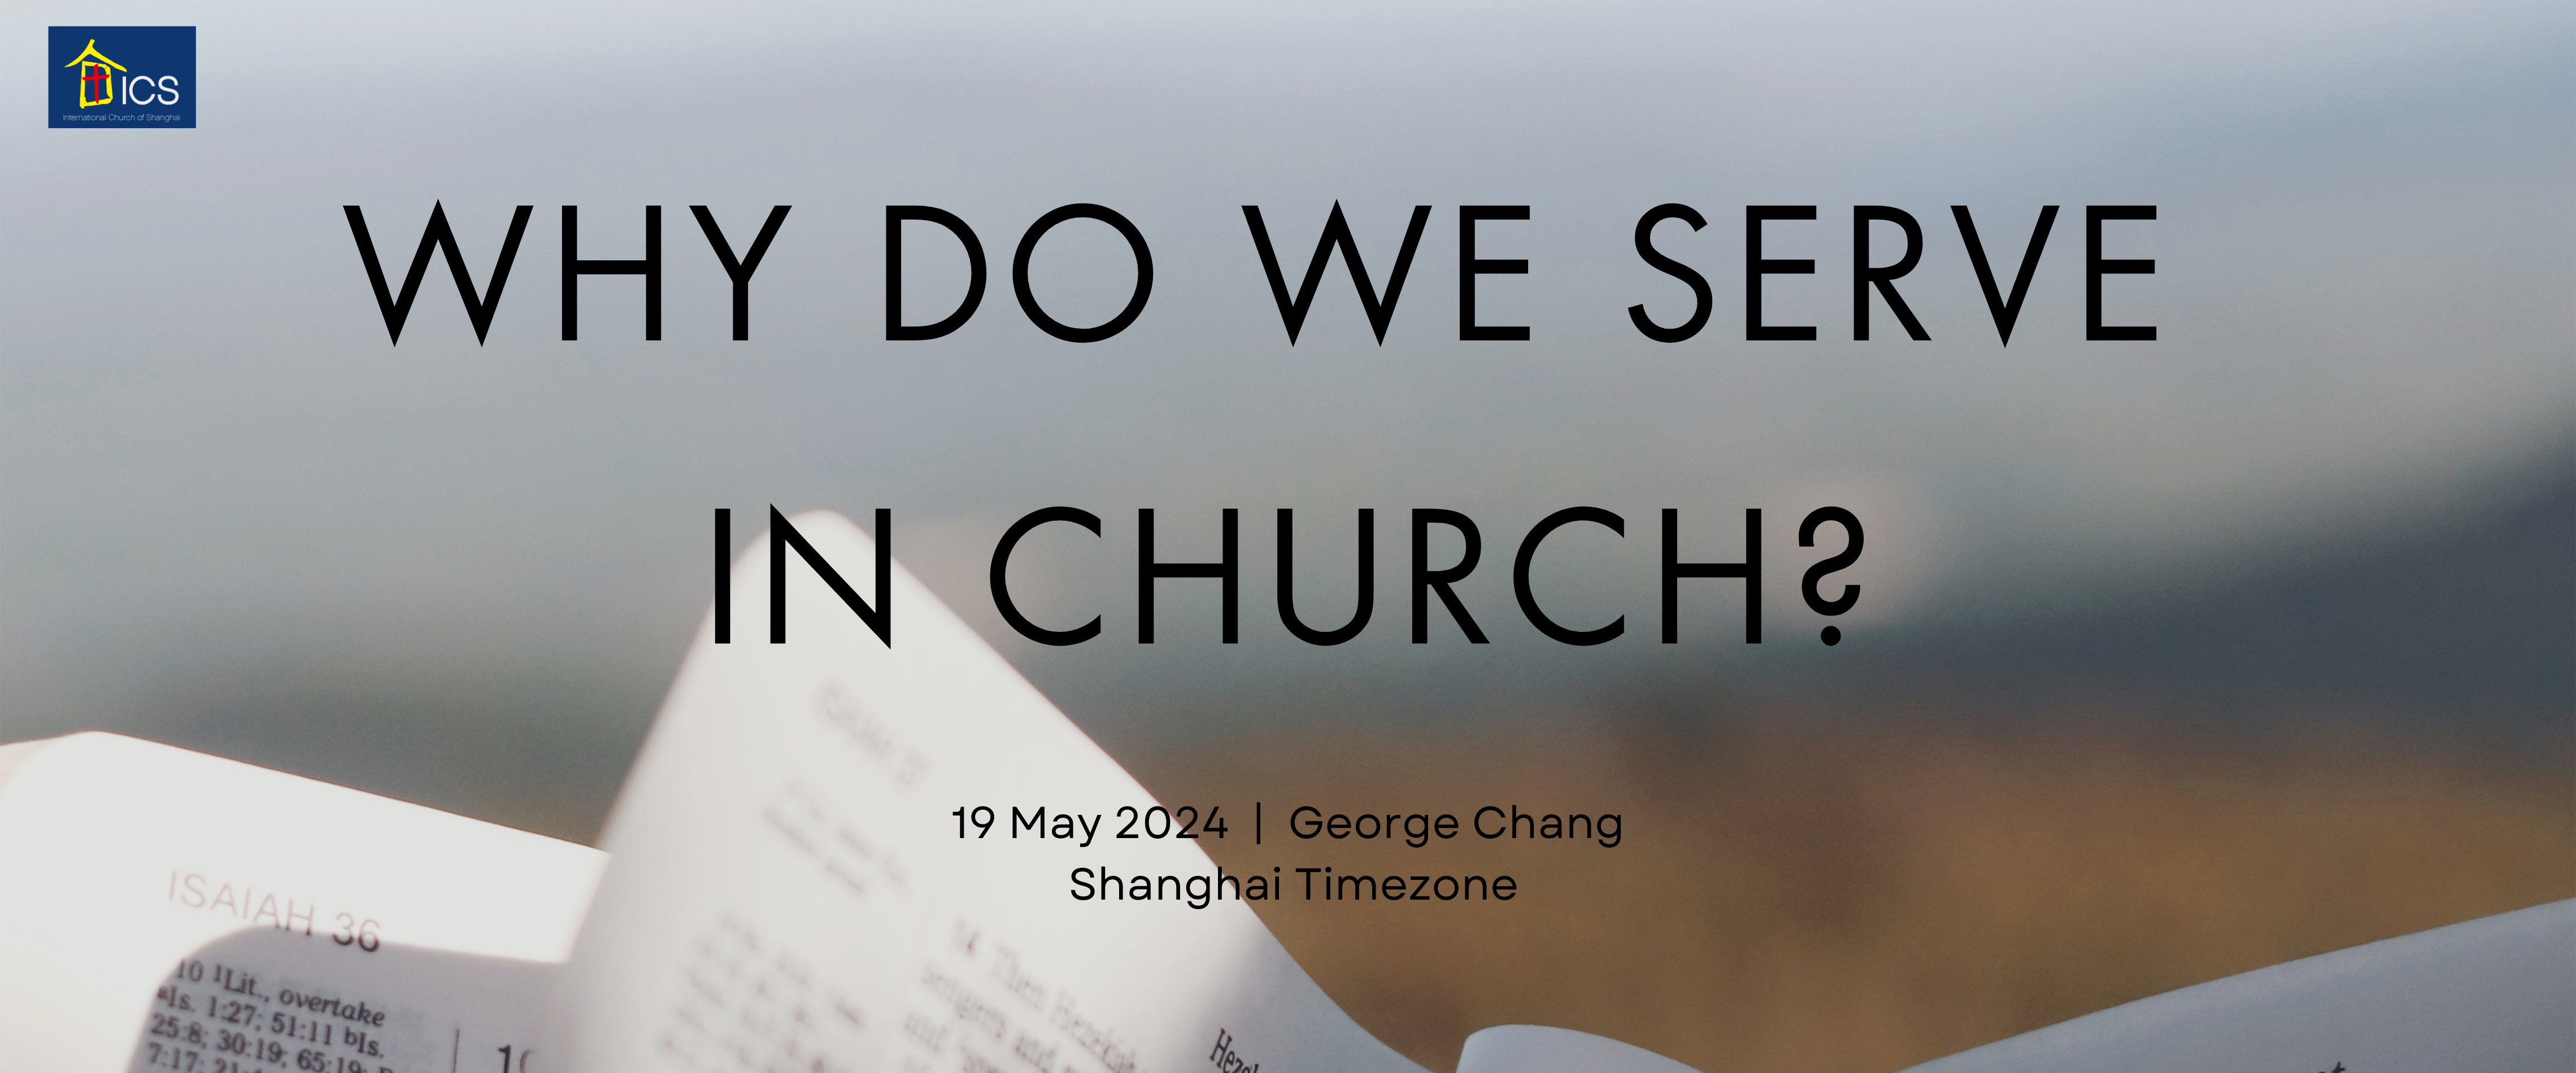 Why do we serve in church?